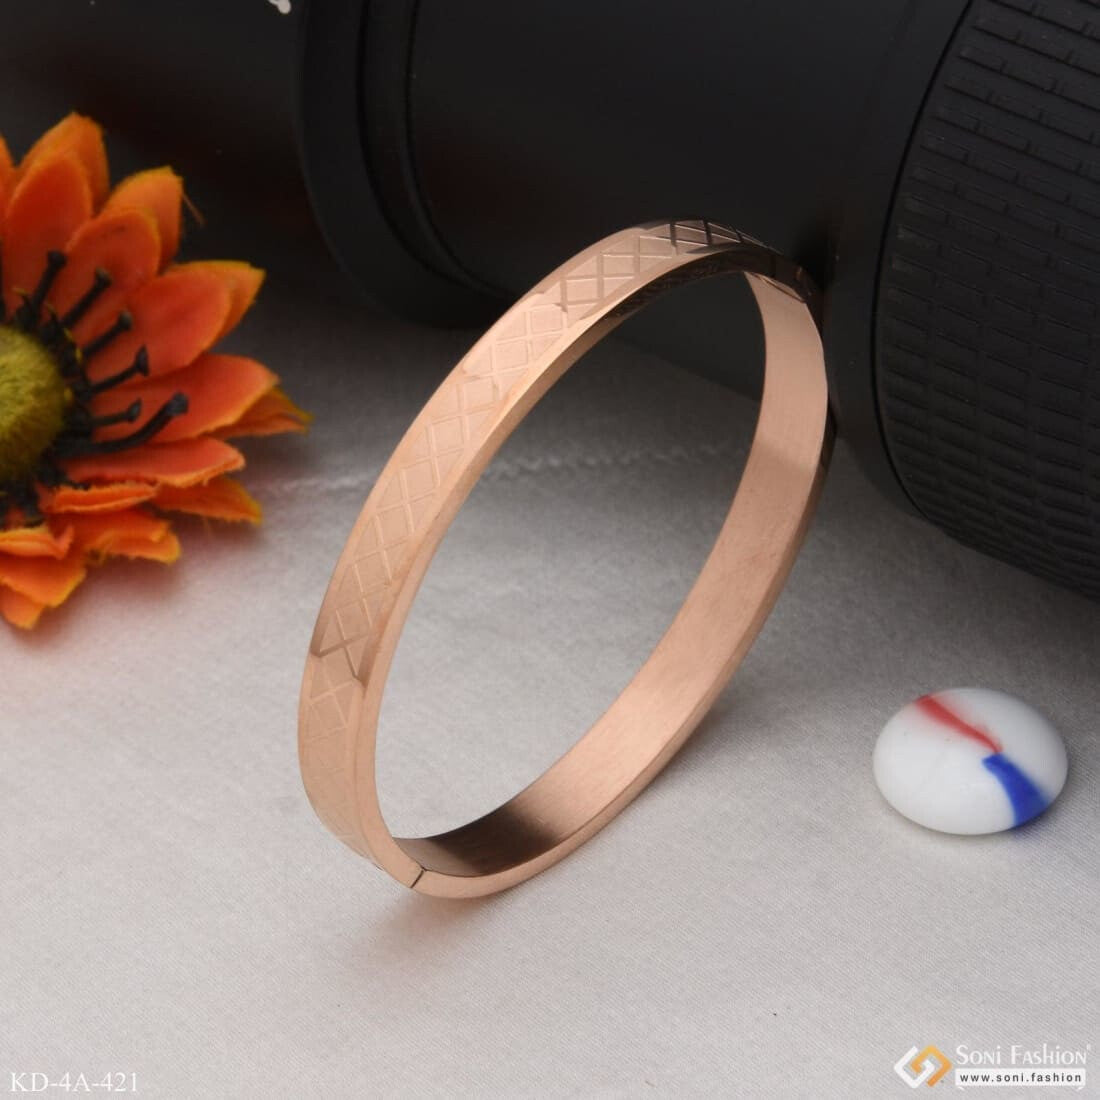 Stunning Design Superior Quality Rose Gold Kada For Men - Style A421 ...